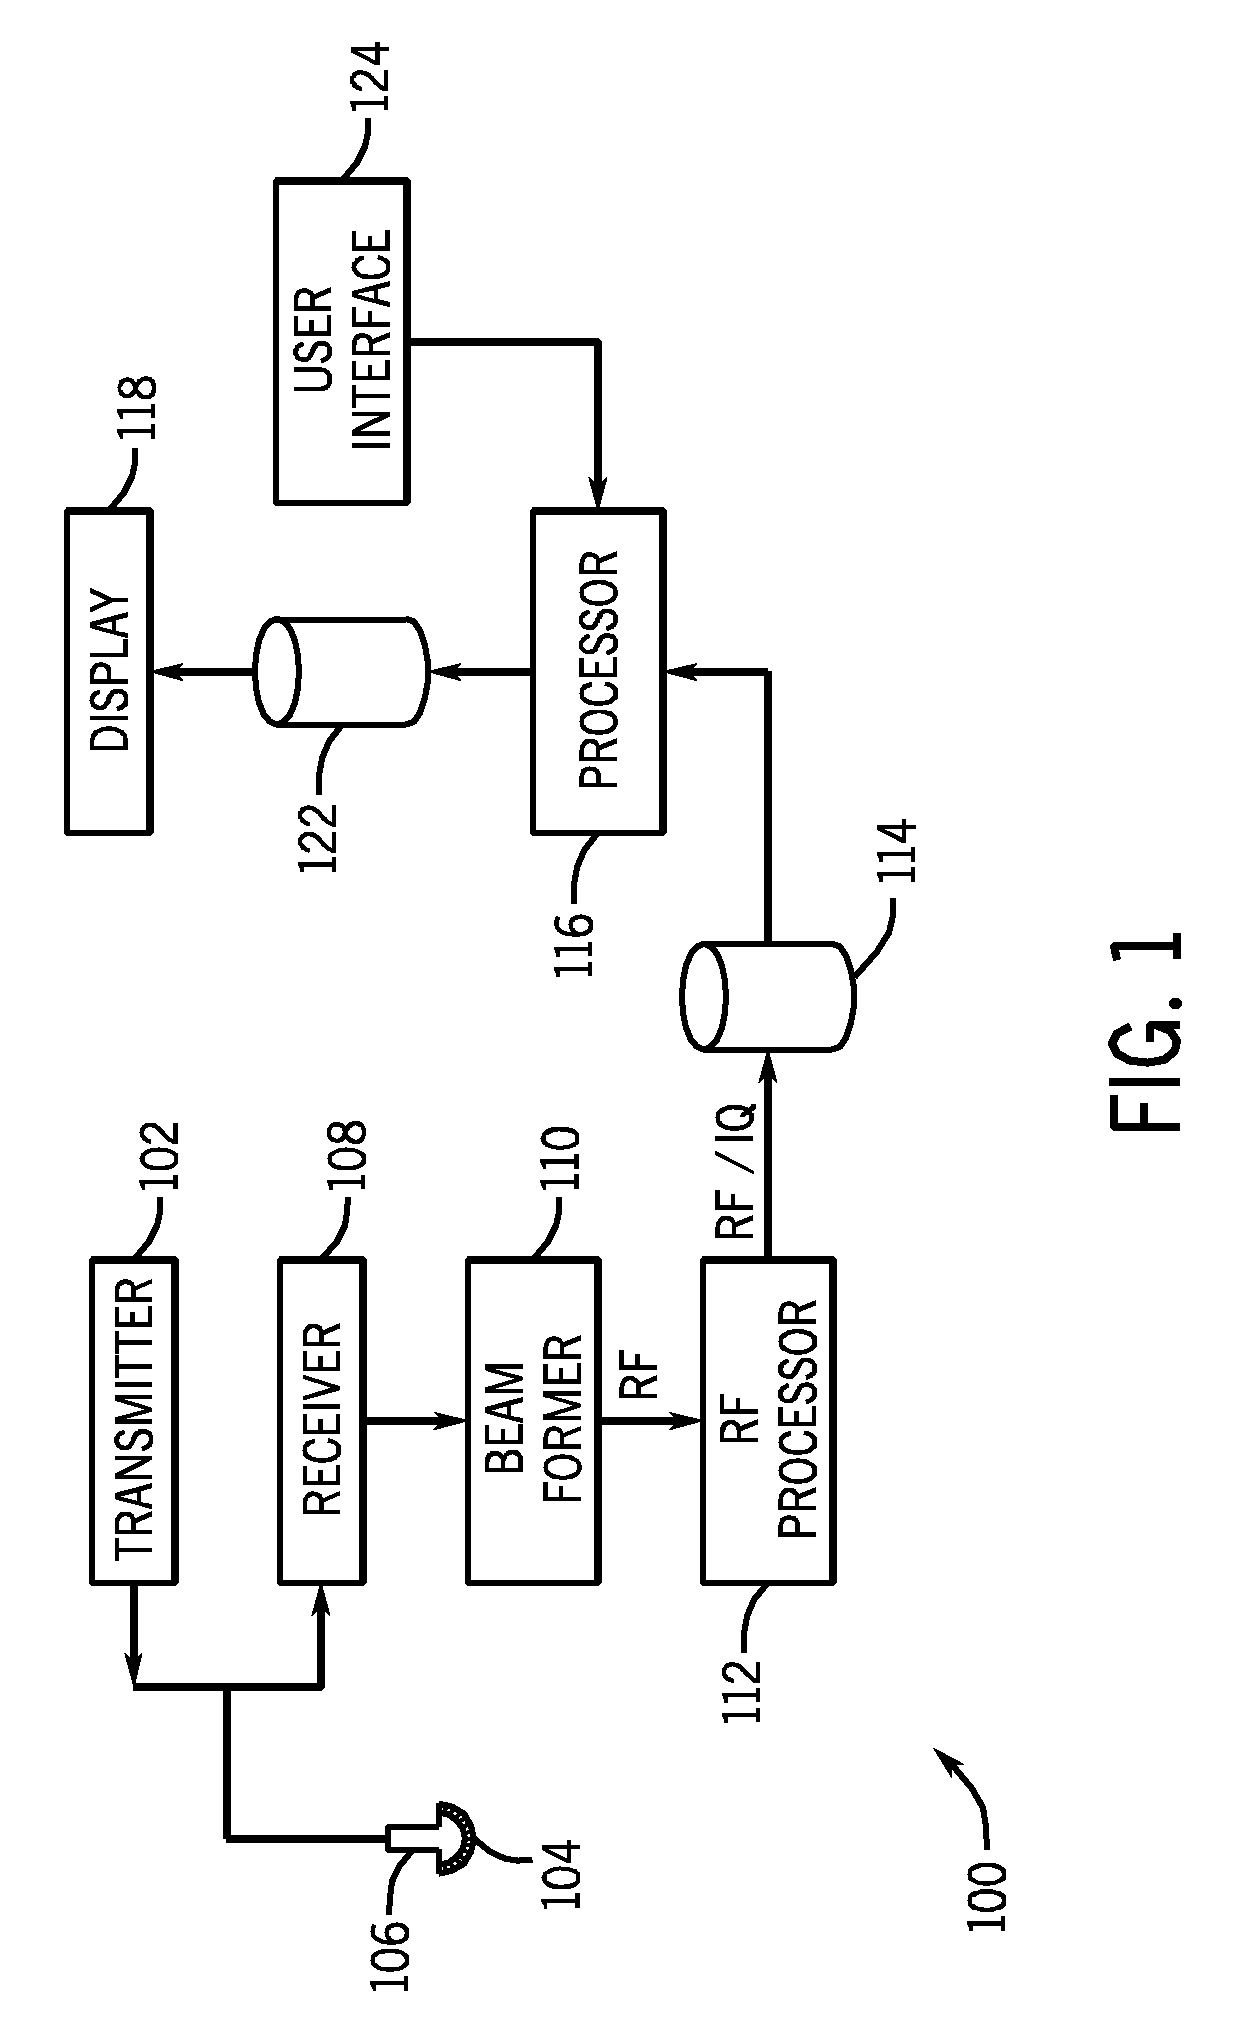 Ultrasound transducer with improved acoustic performance